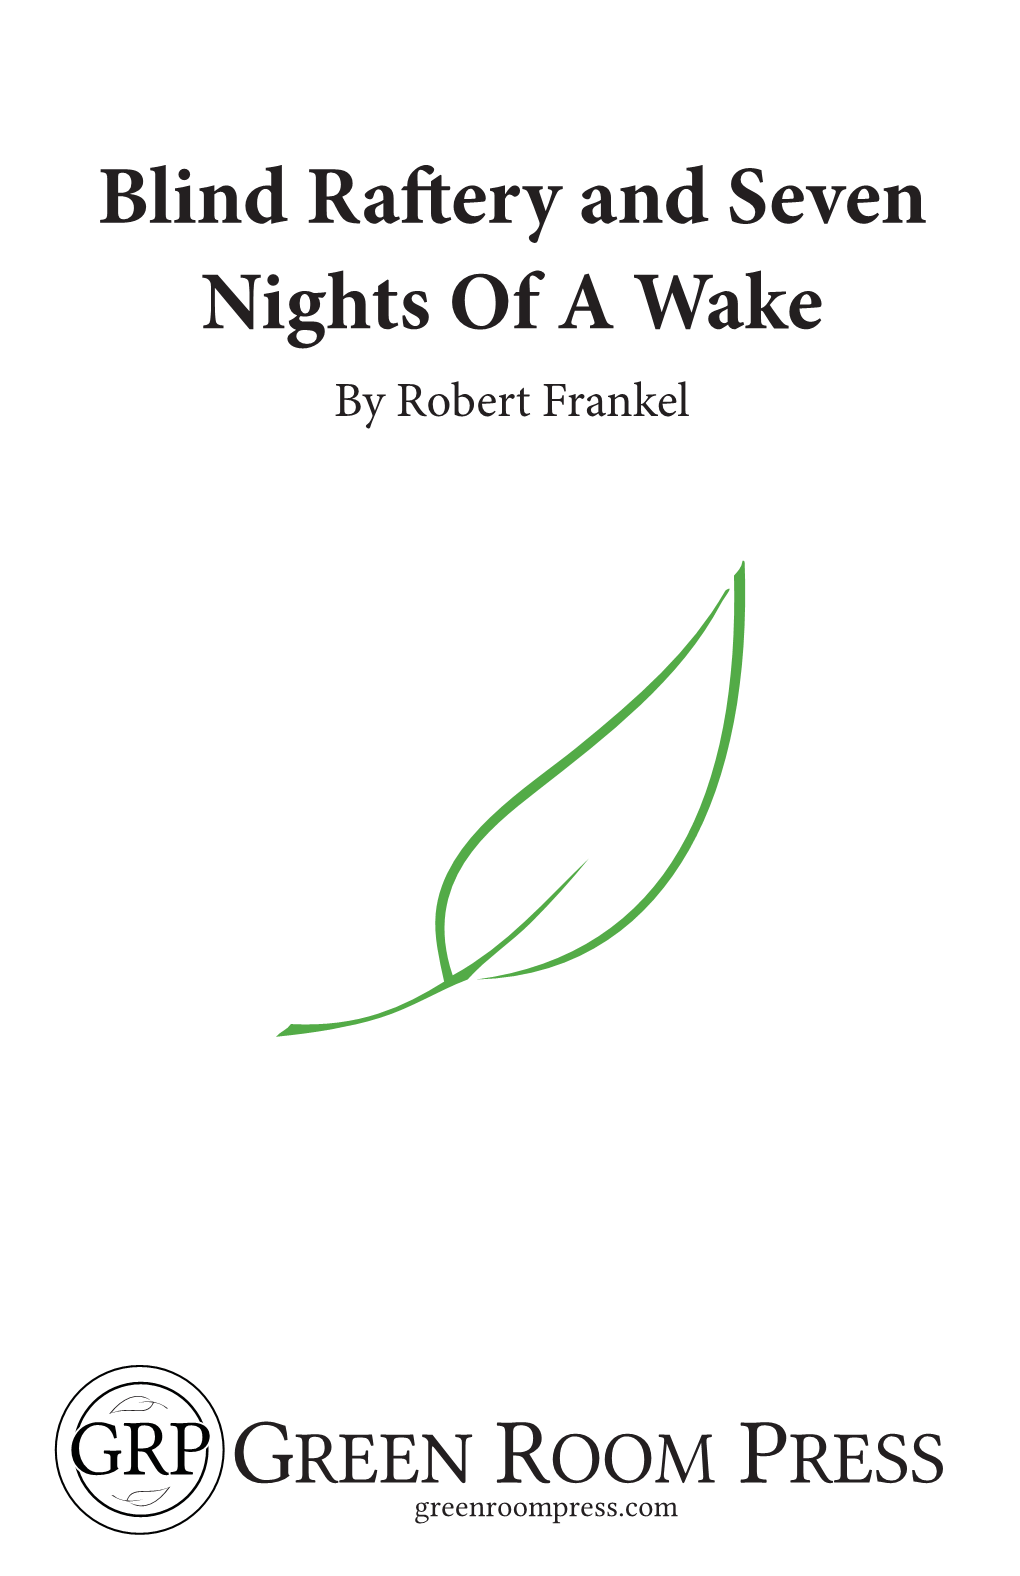 BLIND RAFTERY and SEVEN NIGHTS of a WAKE by Robert Frankel